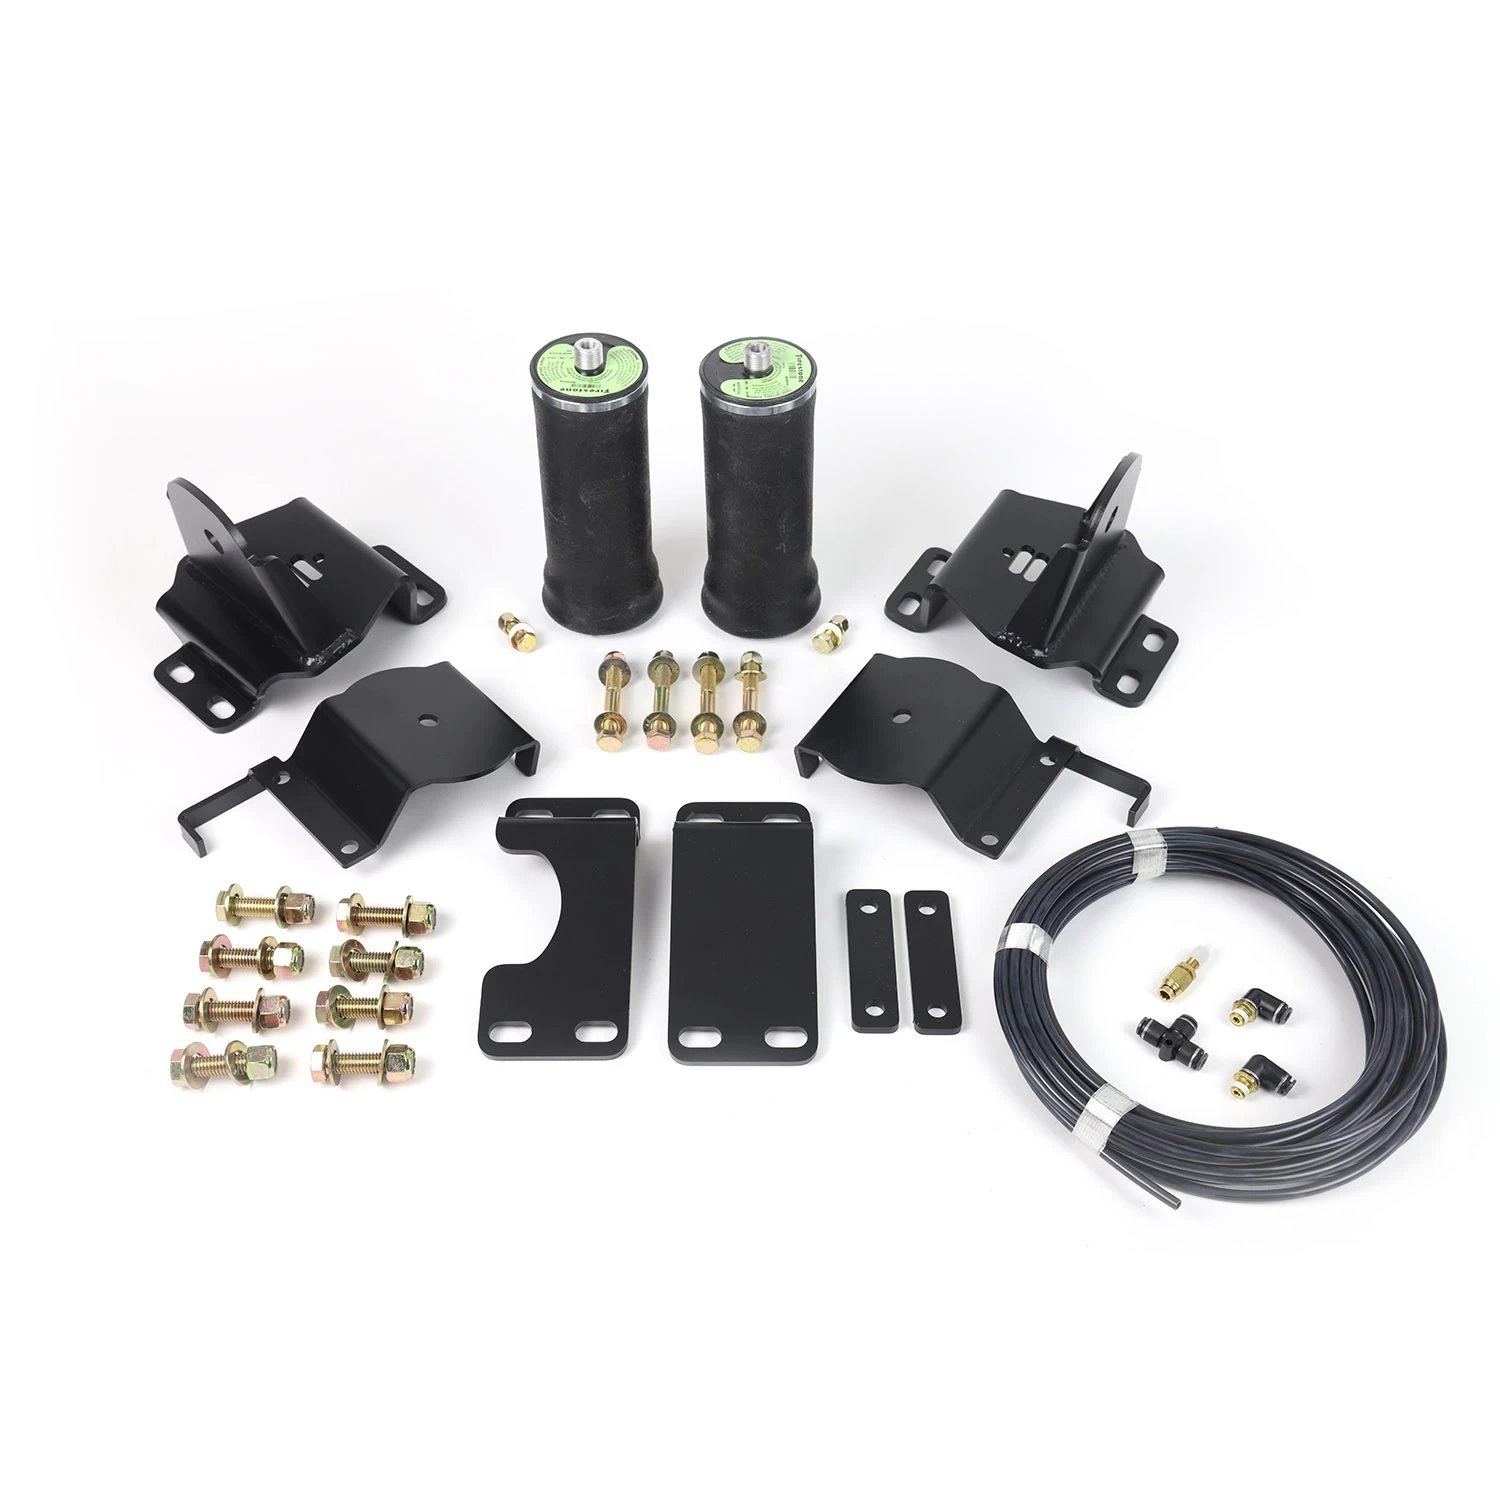 Load Leveling Air-Assist Kit Fits Select Chevy Silverado, GMC Sierra 1500 Trucks with Ridetech Lowering System [Rear]